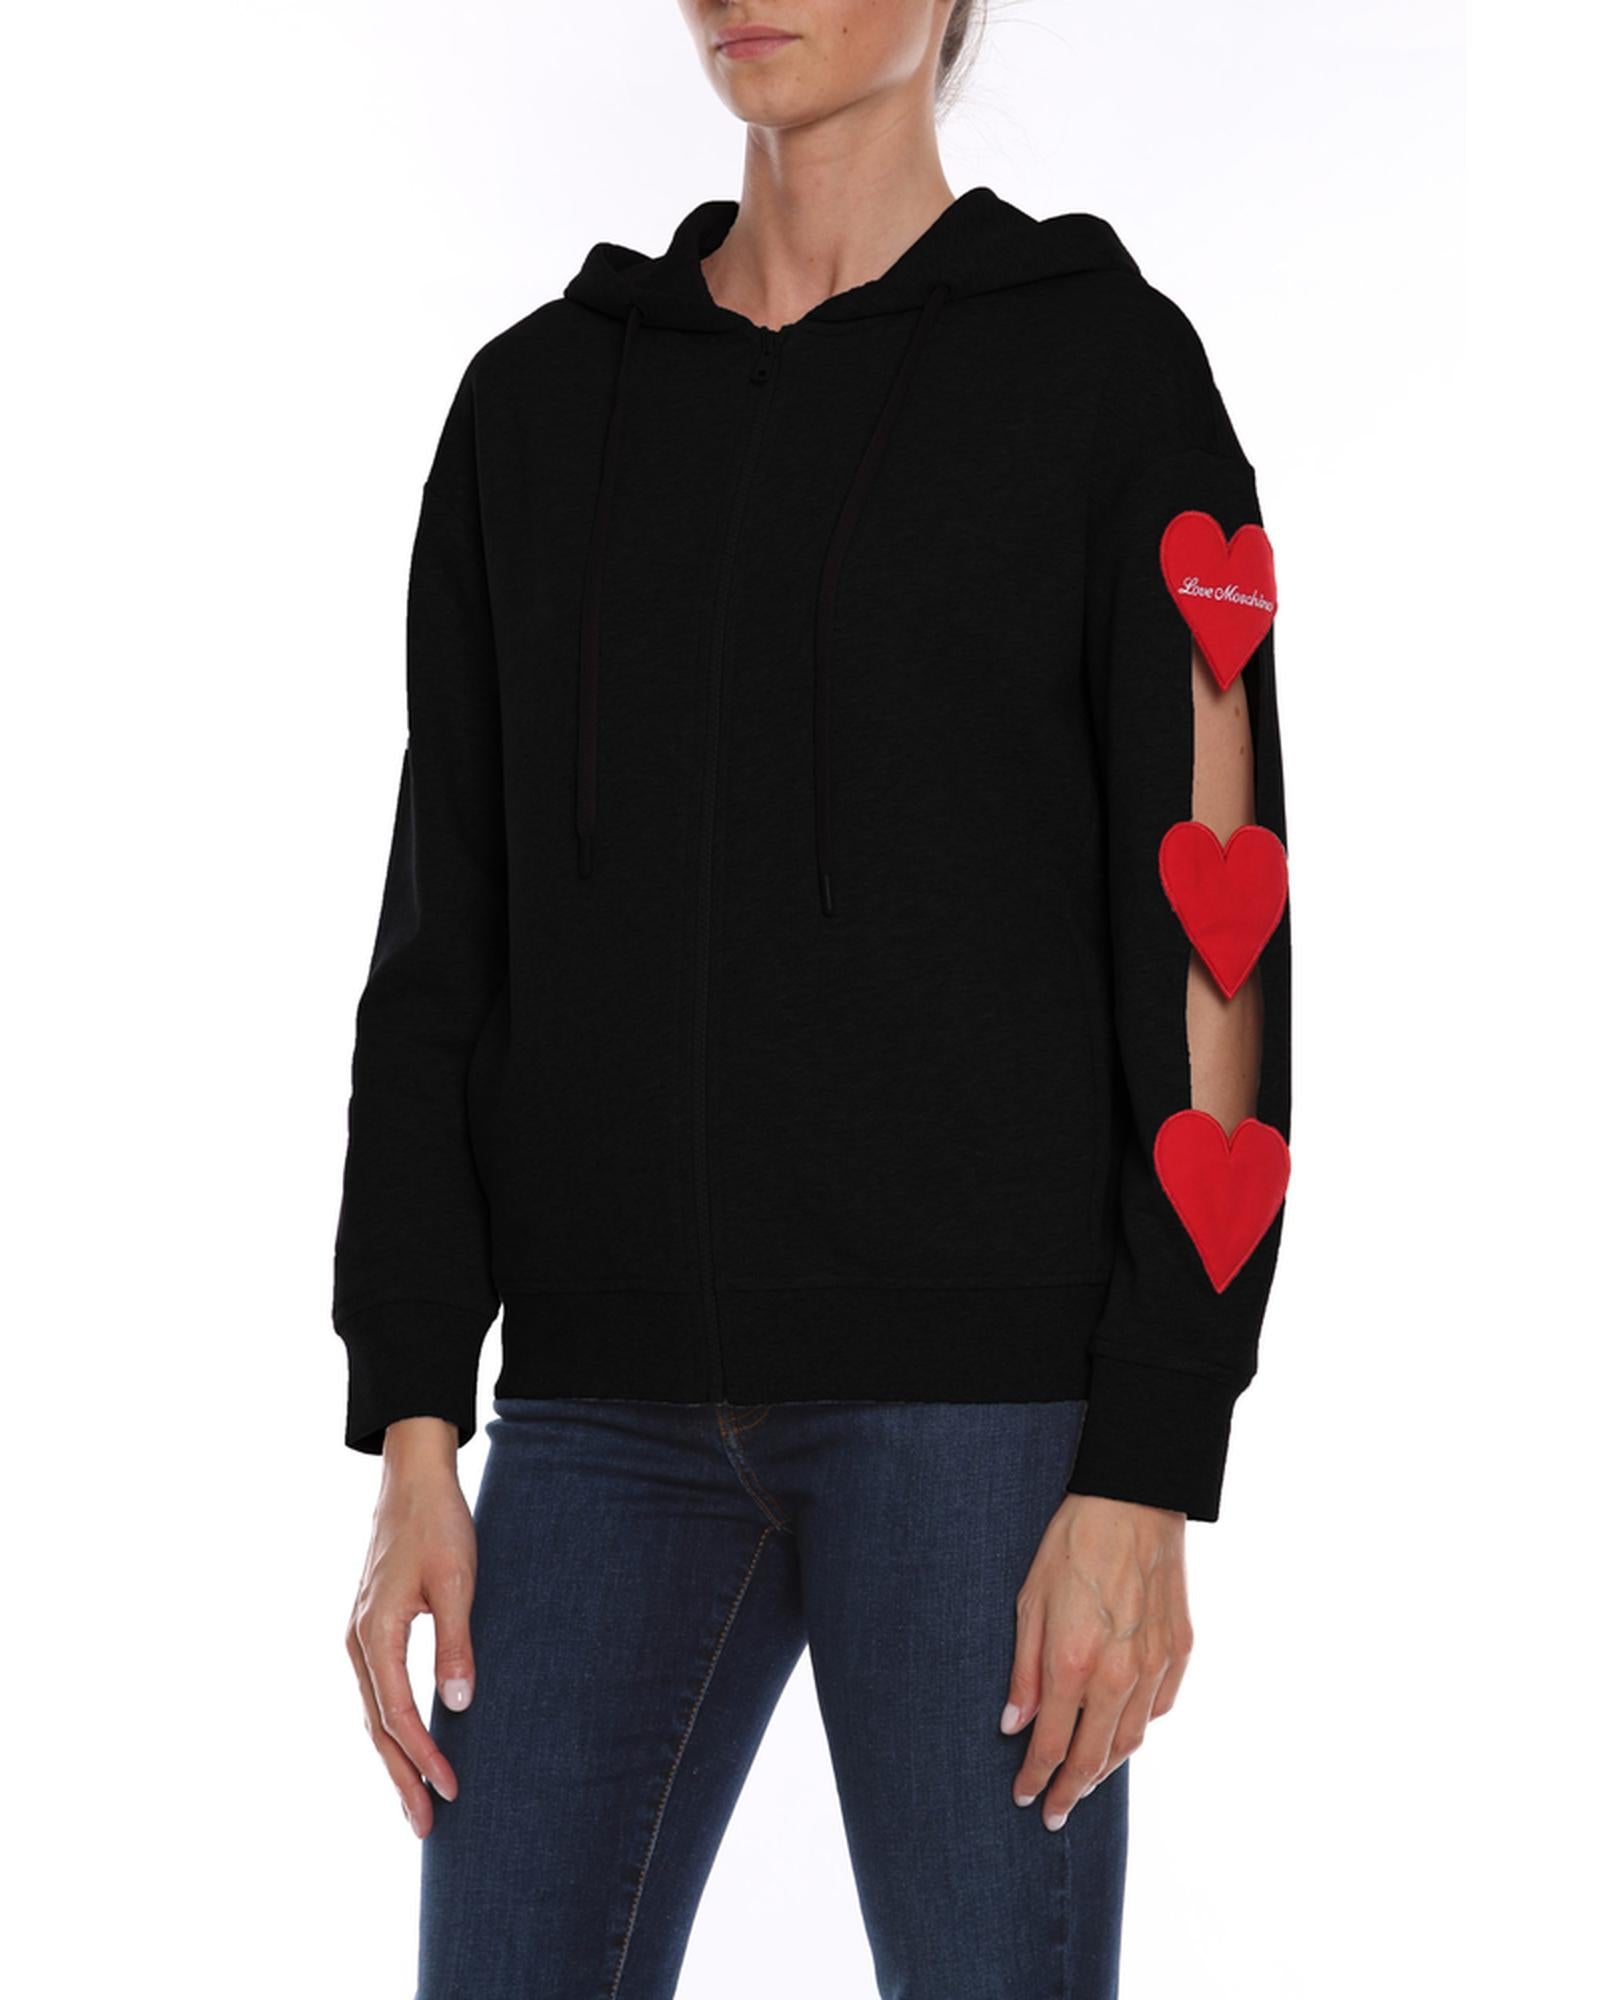 Cotton Sweatshirt with Hood and Embroidered Hearts 44 IT Women